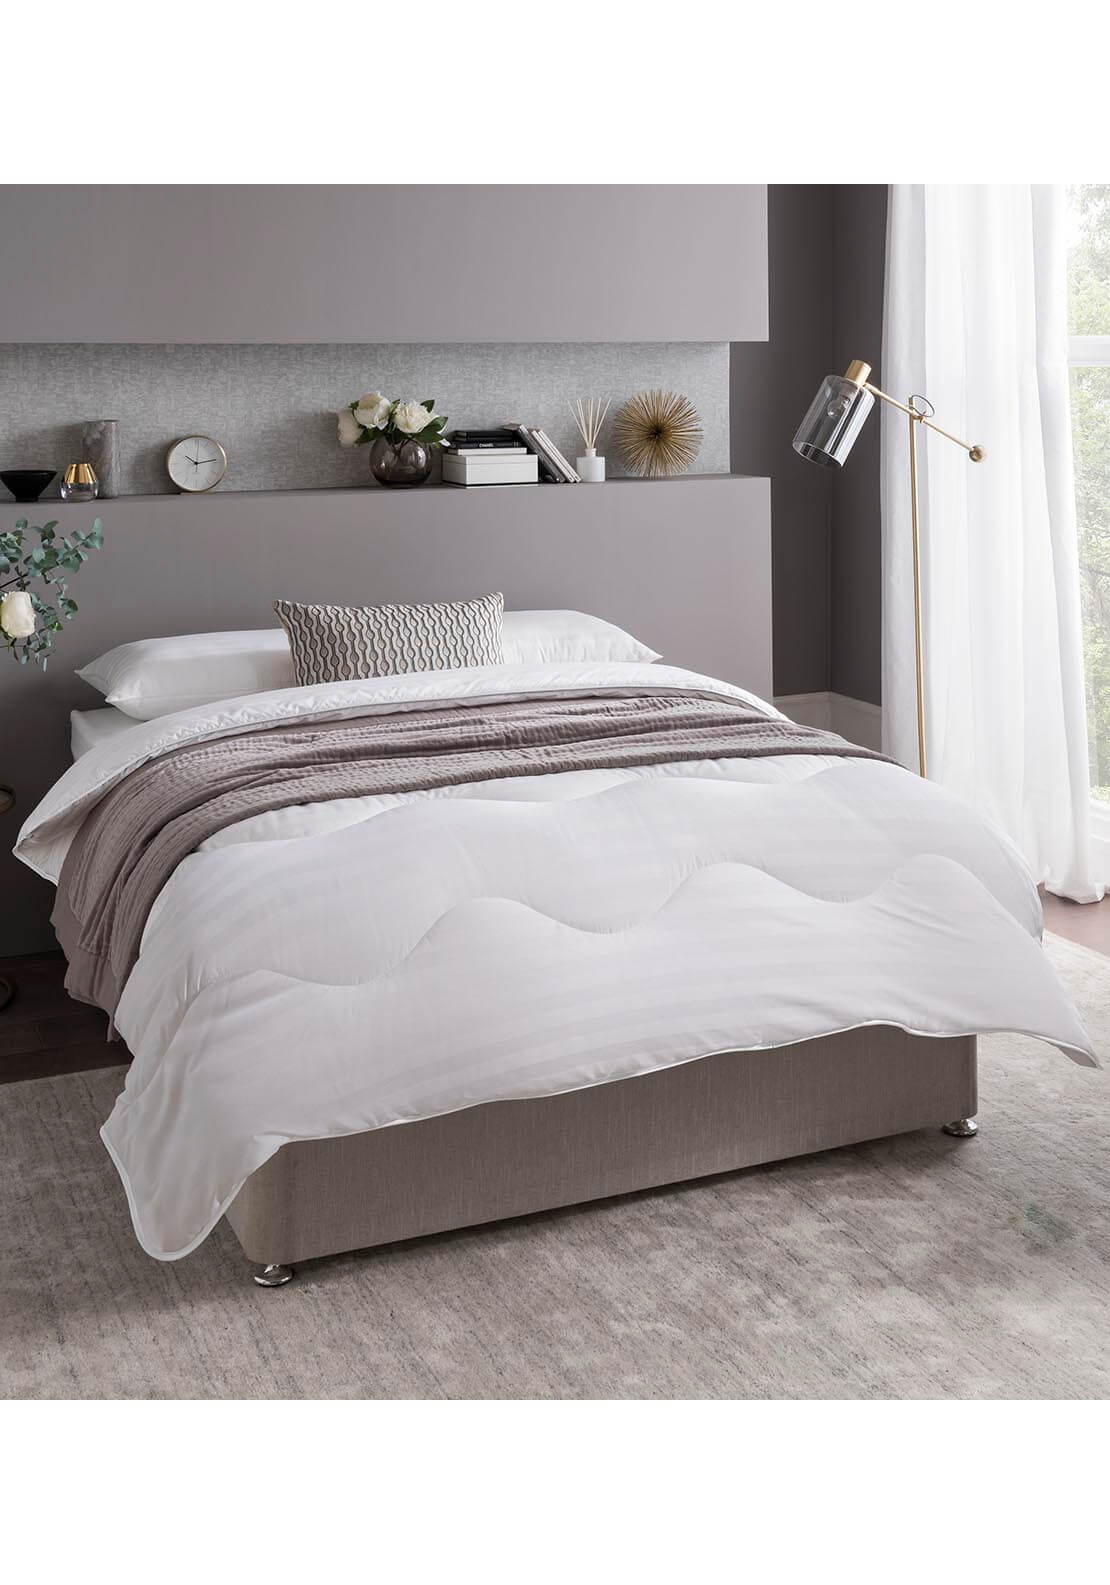 The Fine Bedding Company Boutique Silk Duvet 13.5 Tog 1 Shaws Department Stores